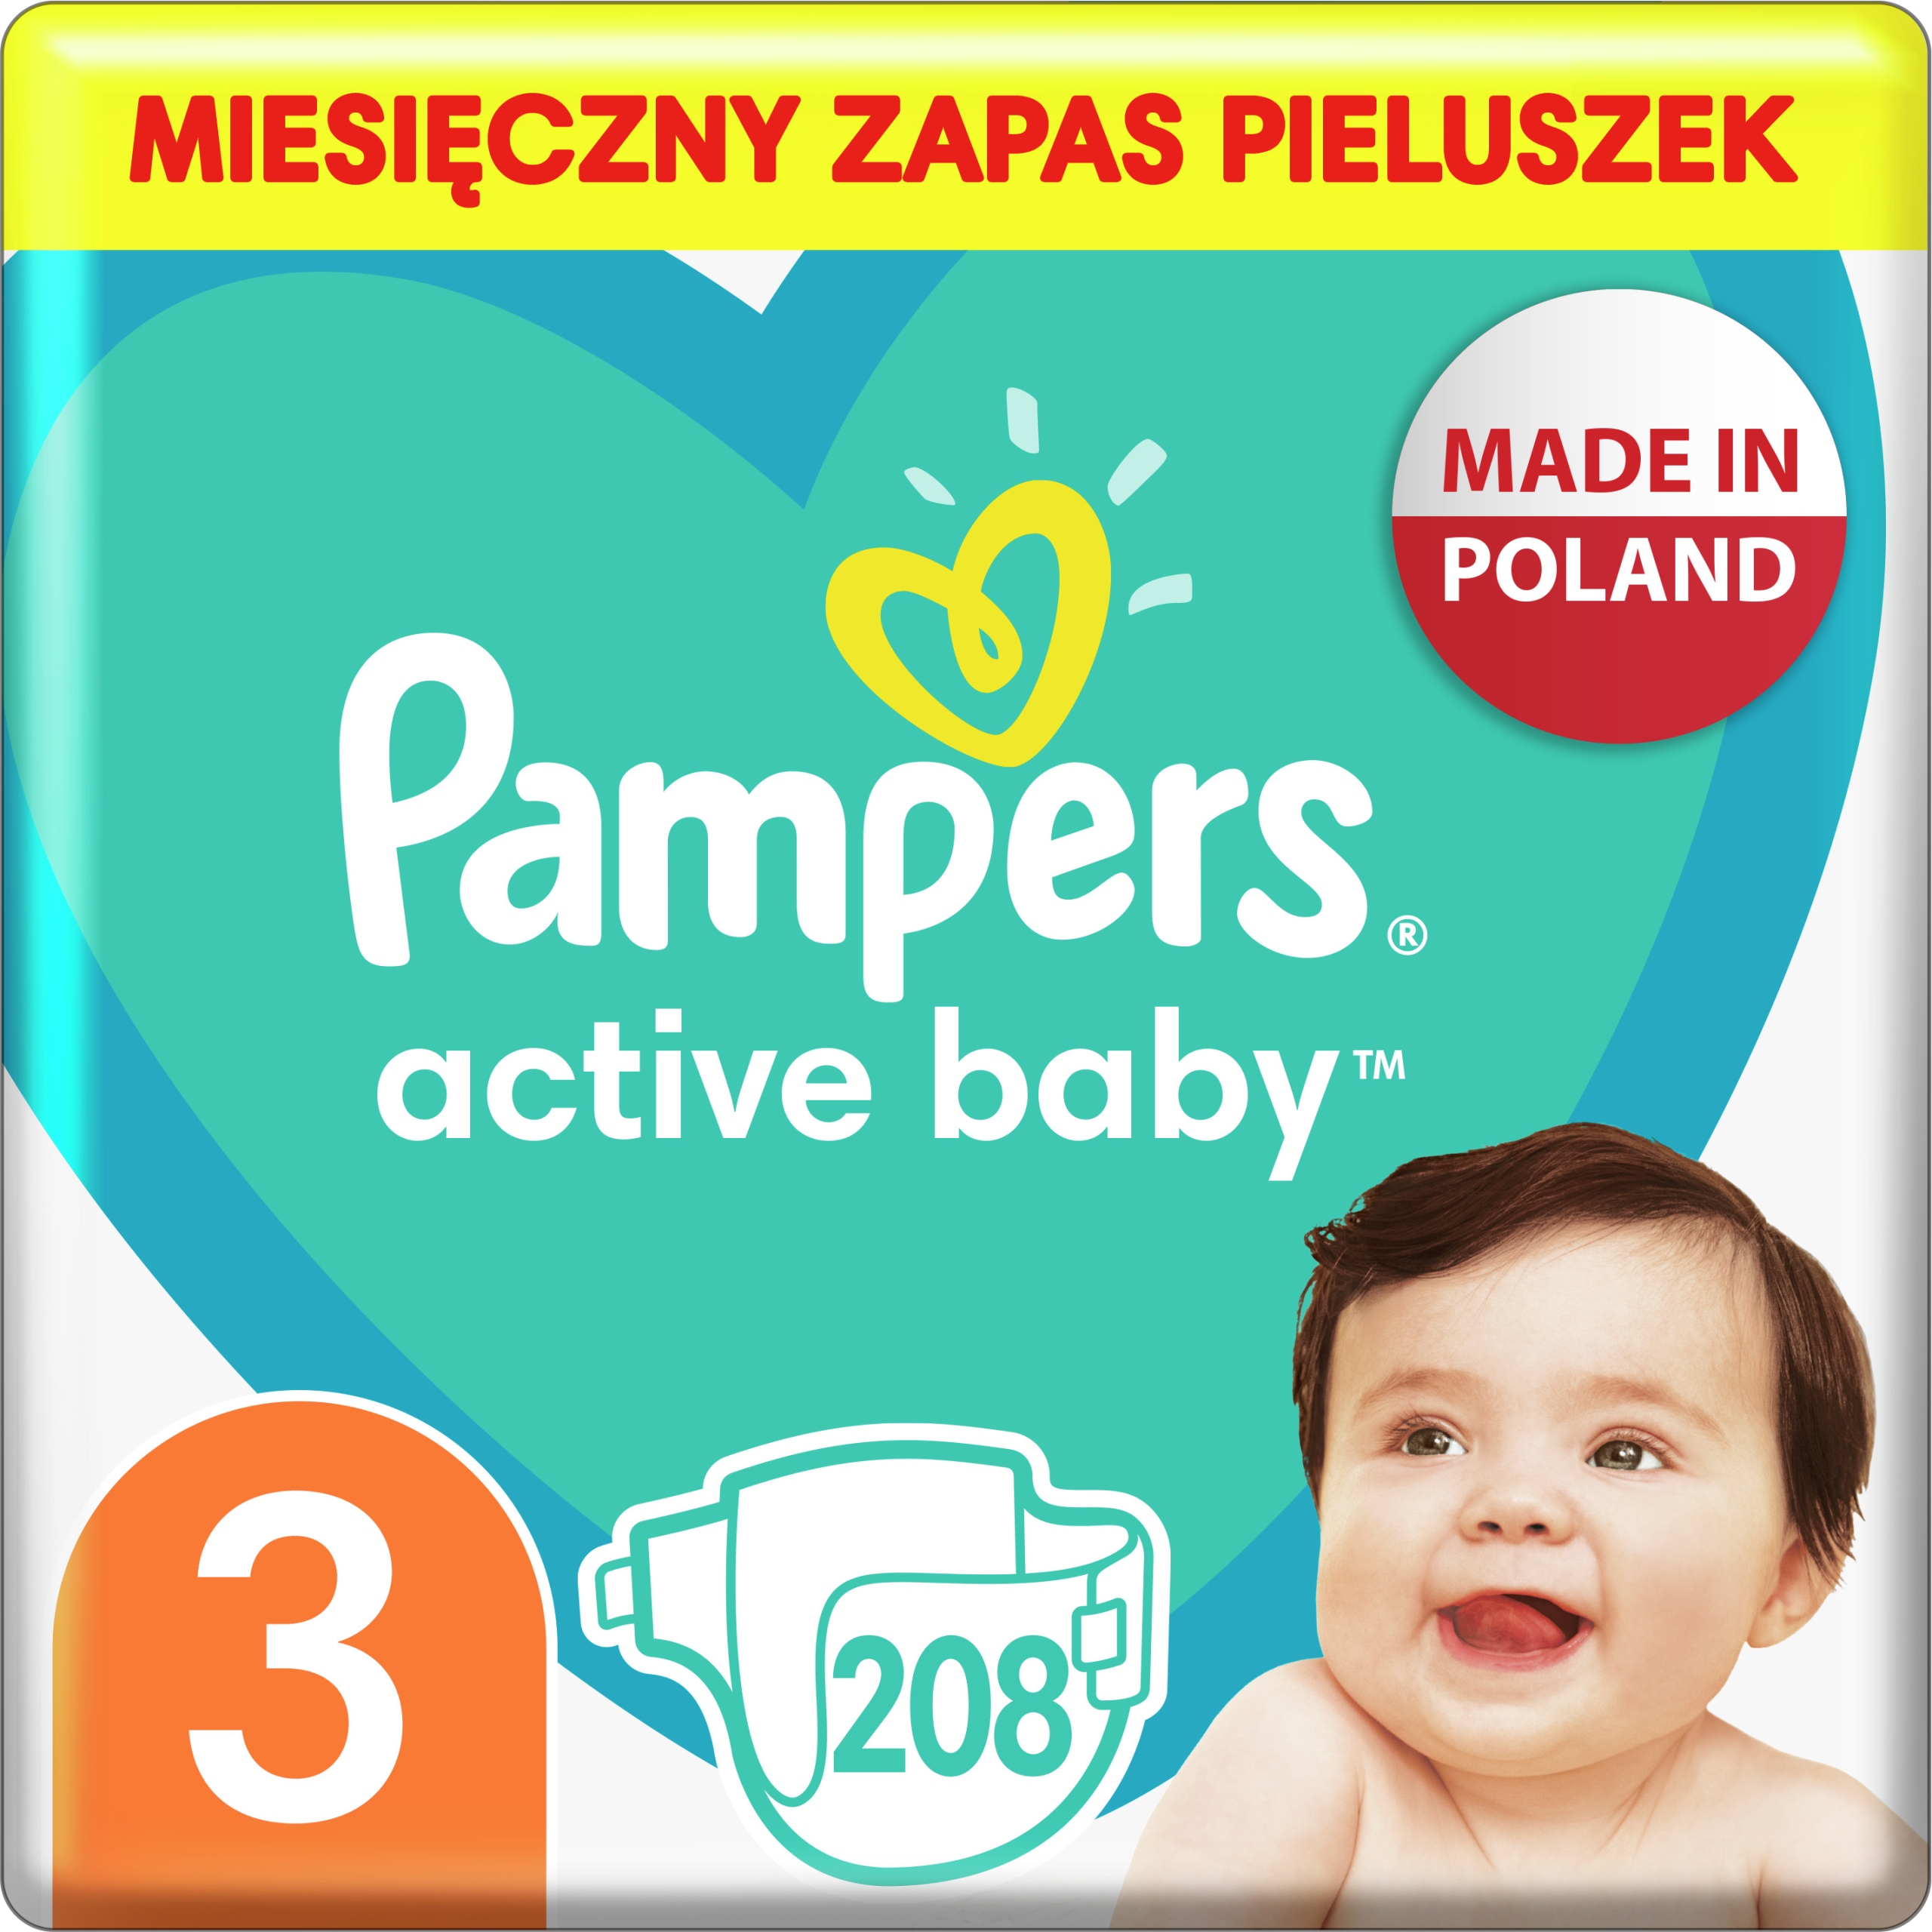 pampers przesikany